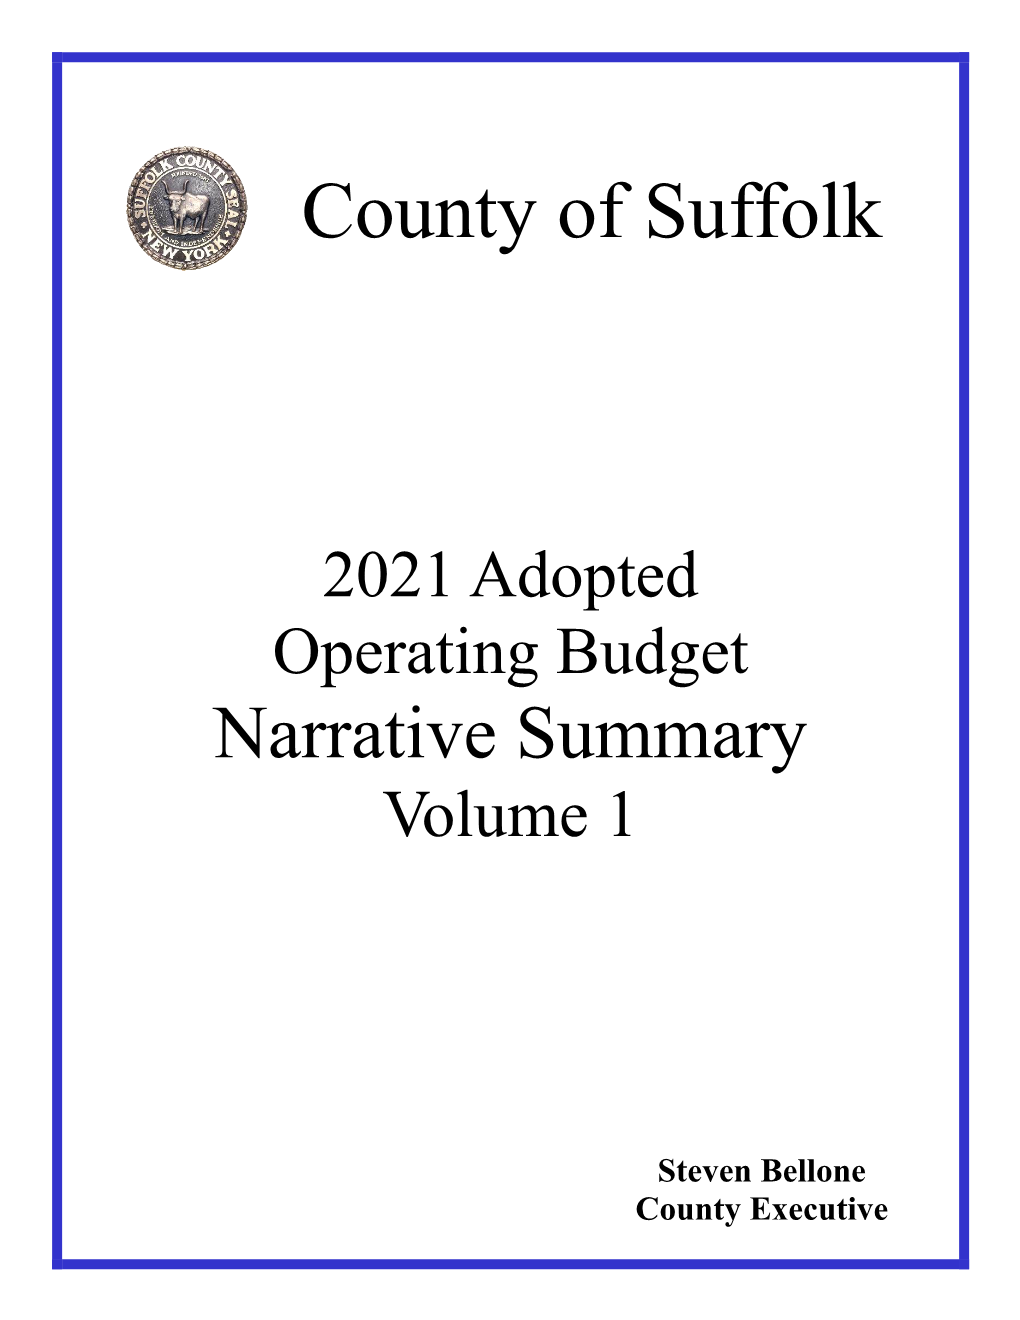 2021 Adopted Operating Budget Narrative Summary Volume 1